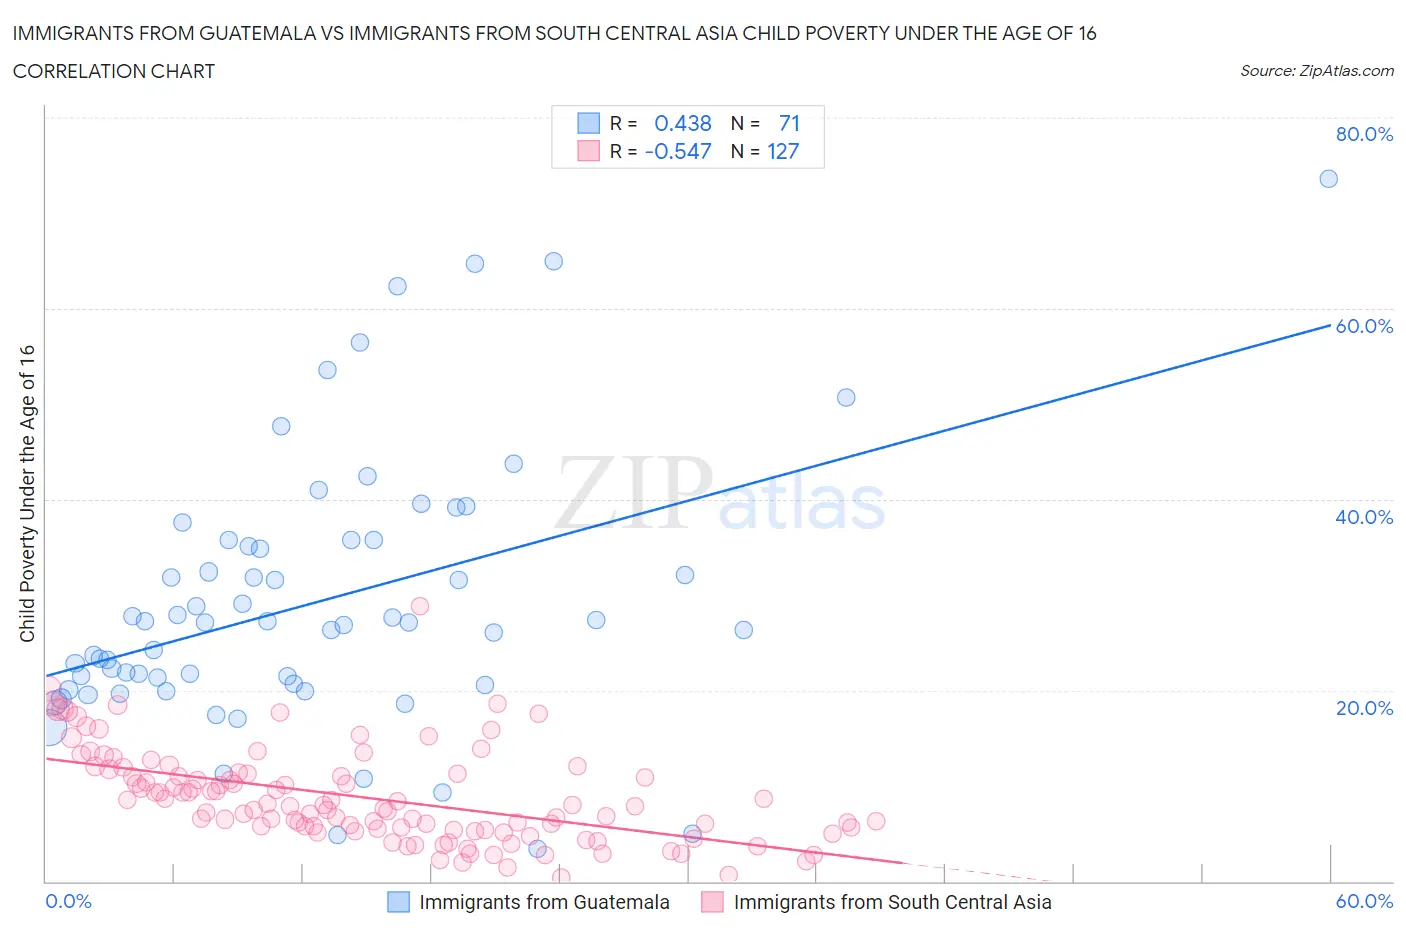 Immigrants from Guatemala vs Immigrants from South Central Asia Child Poverty Under the Age of 16